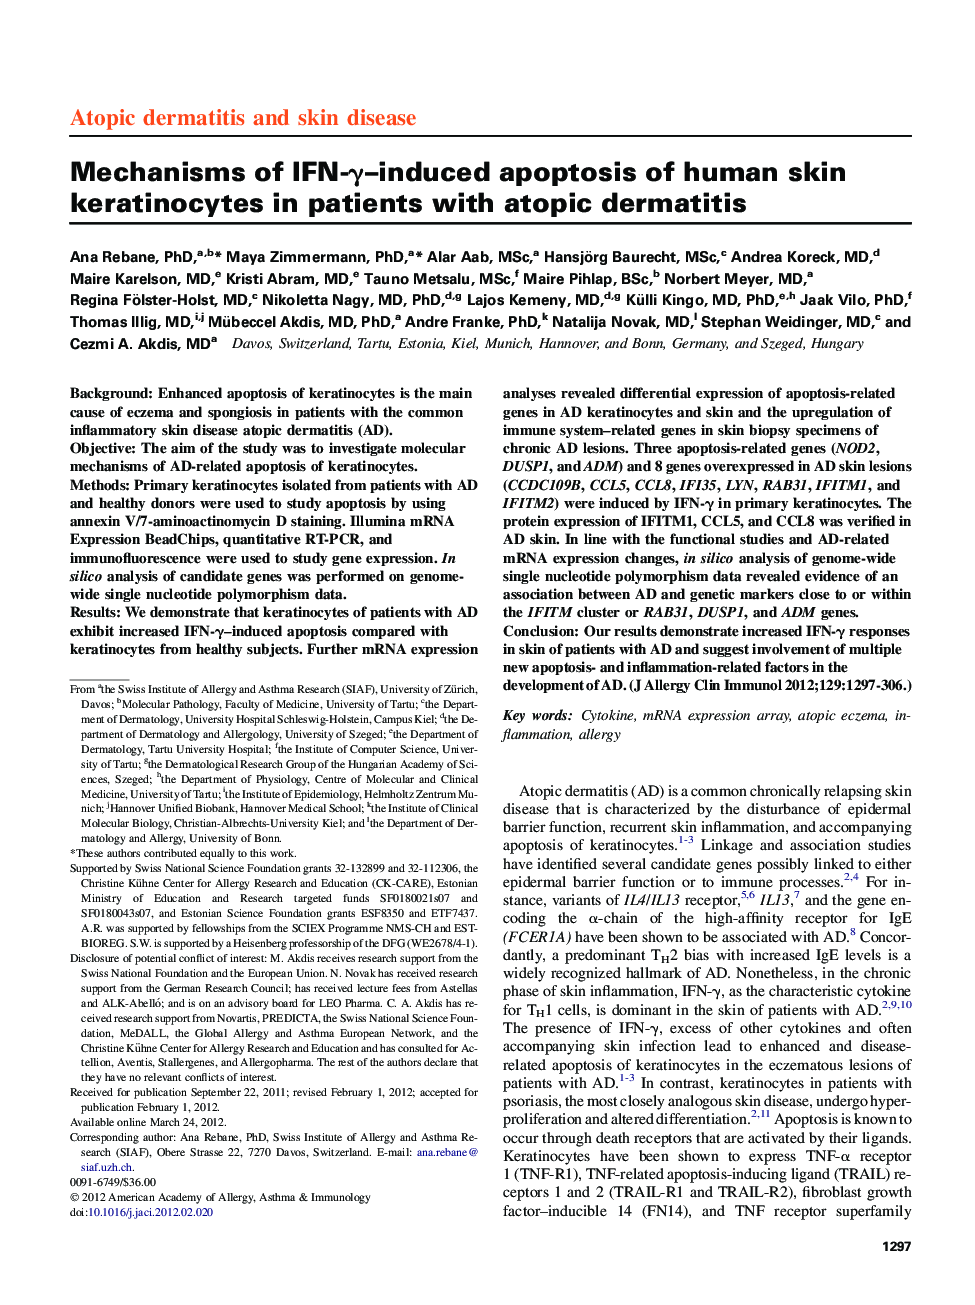 Mechanisms of IFN-γ–induced apoptosis of human skin keratinocytes in patients with atopic dermatitis 